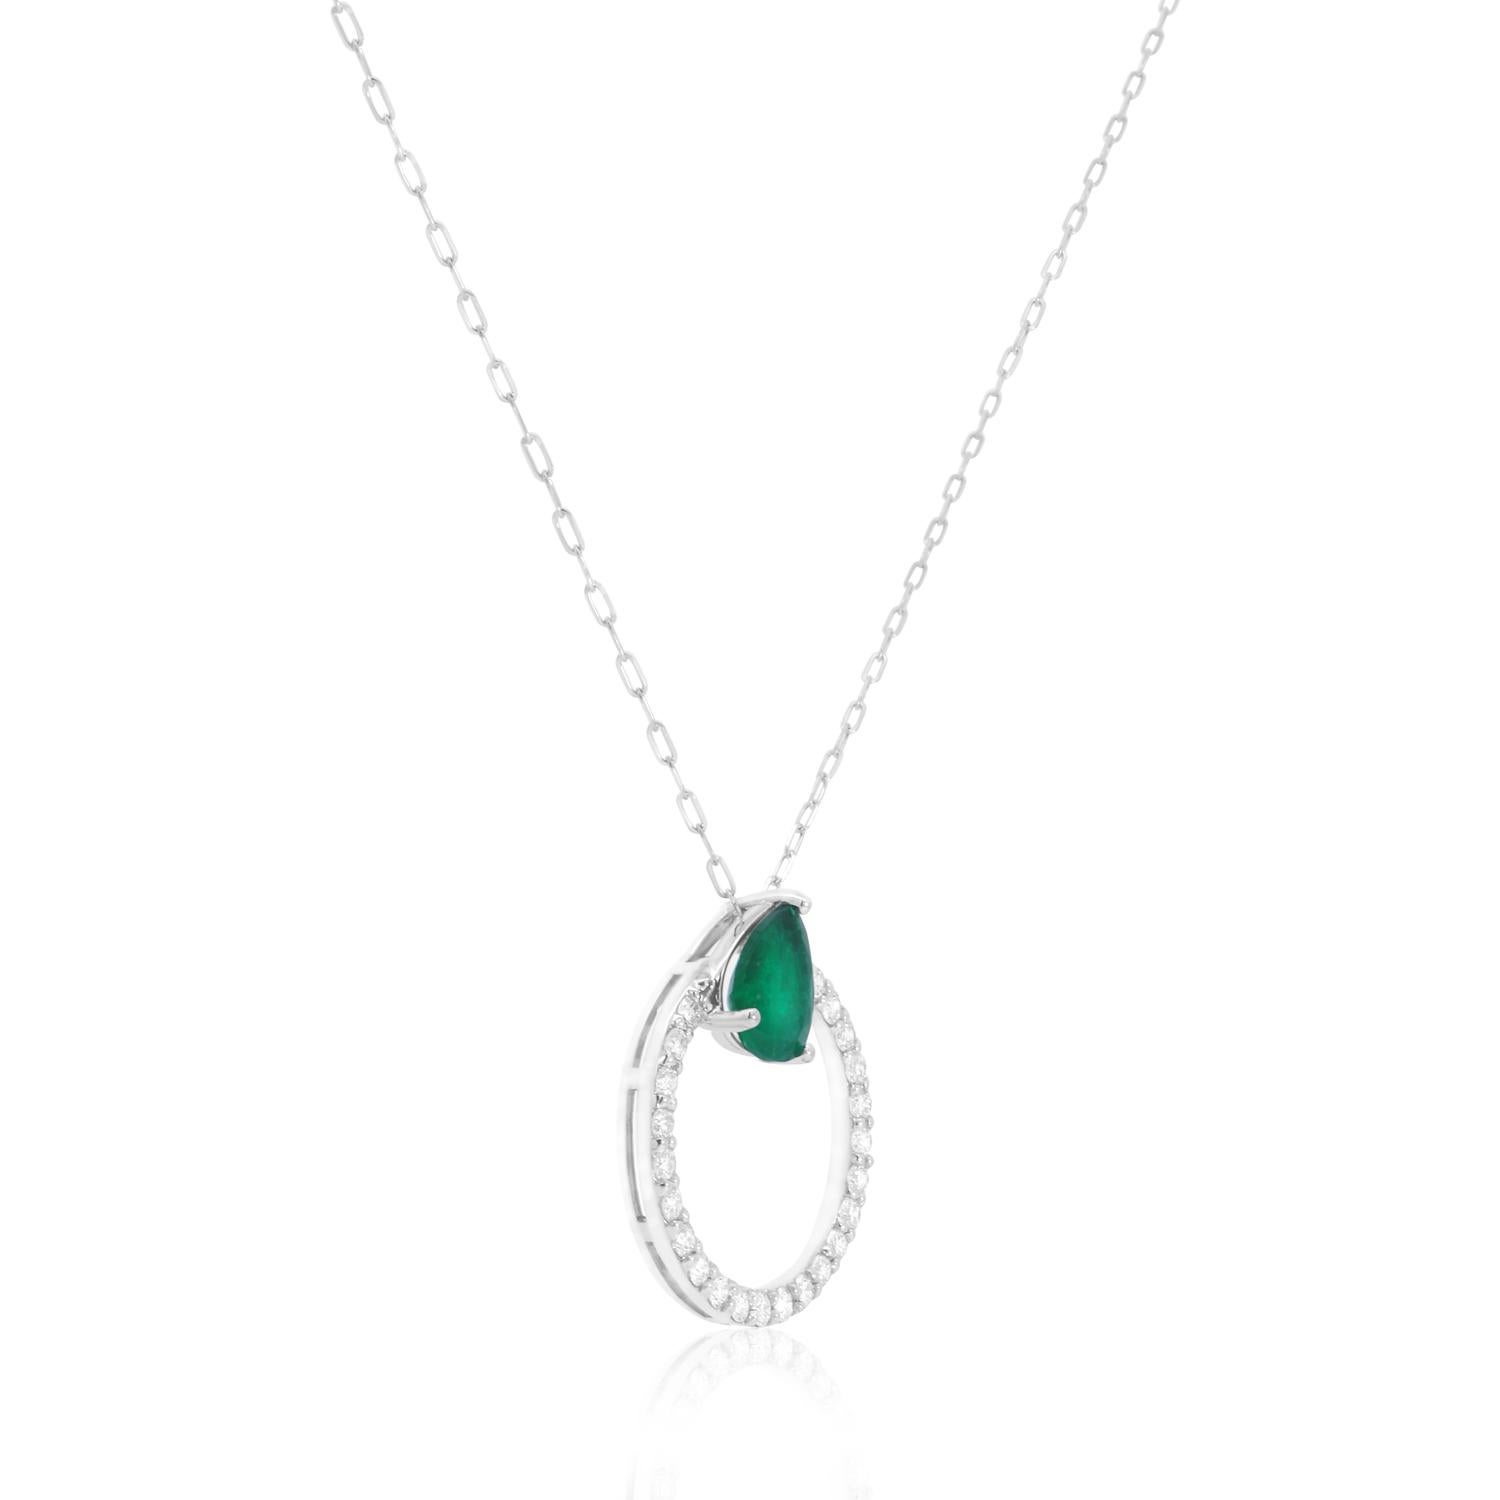 14K White Gold

1 Pear Shape Emerald at approximately 1.50 Carats Total Weight - Measuring 9x7 millimeters

0.75 Carats Total Weight of Round Brilliant White Diamonds

Color: H-I / Clarity: SI 

Pictured mini paperclip chain in white gold